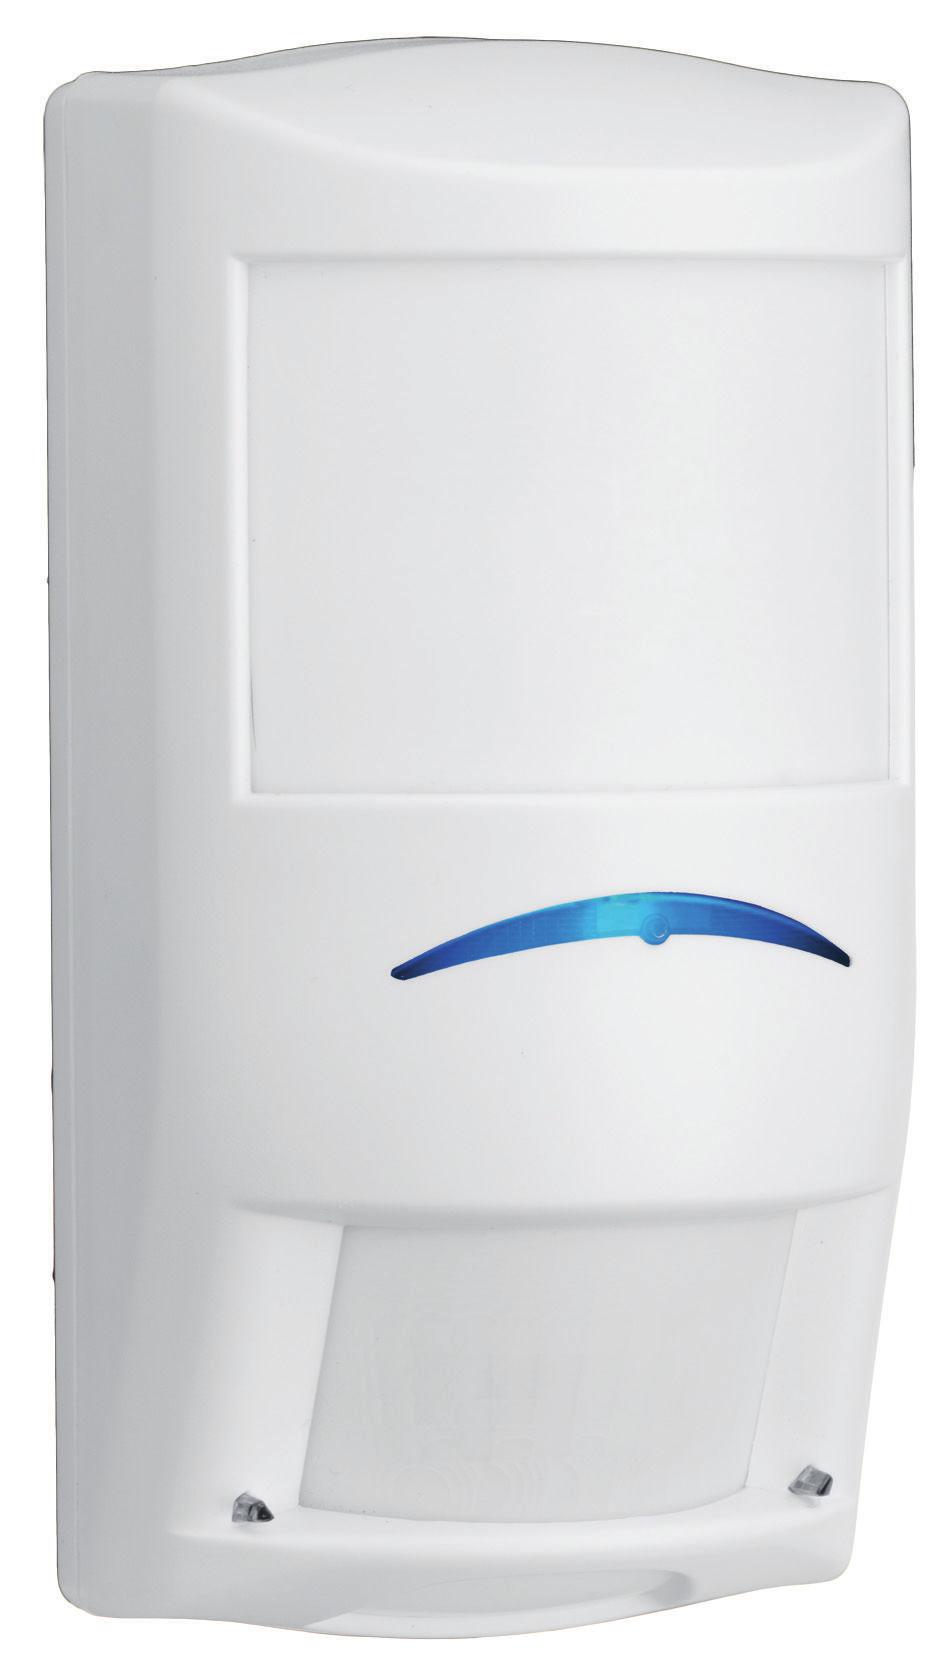 Intrsion Alarm Systems ISC PPR WA6x Professional Series PIR Detectors with Anti mask ISC PPR WA6x Professional Series PIR Detectors with Anti mask www.boschsecrity.